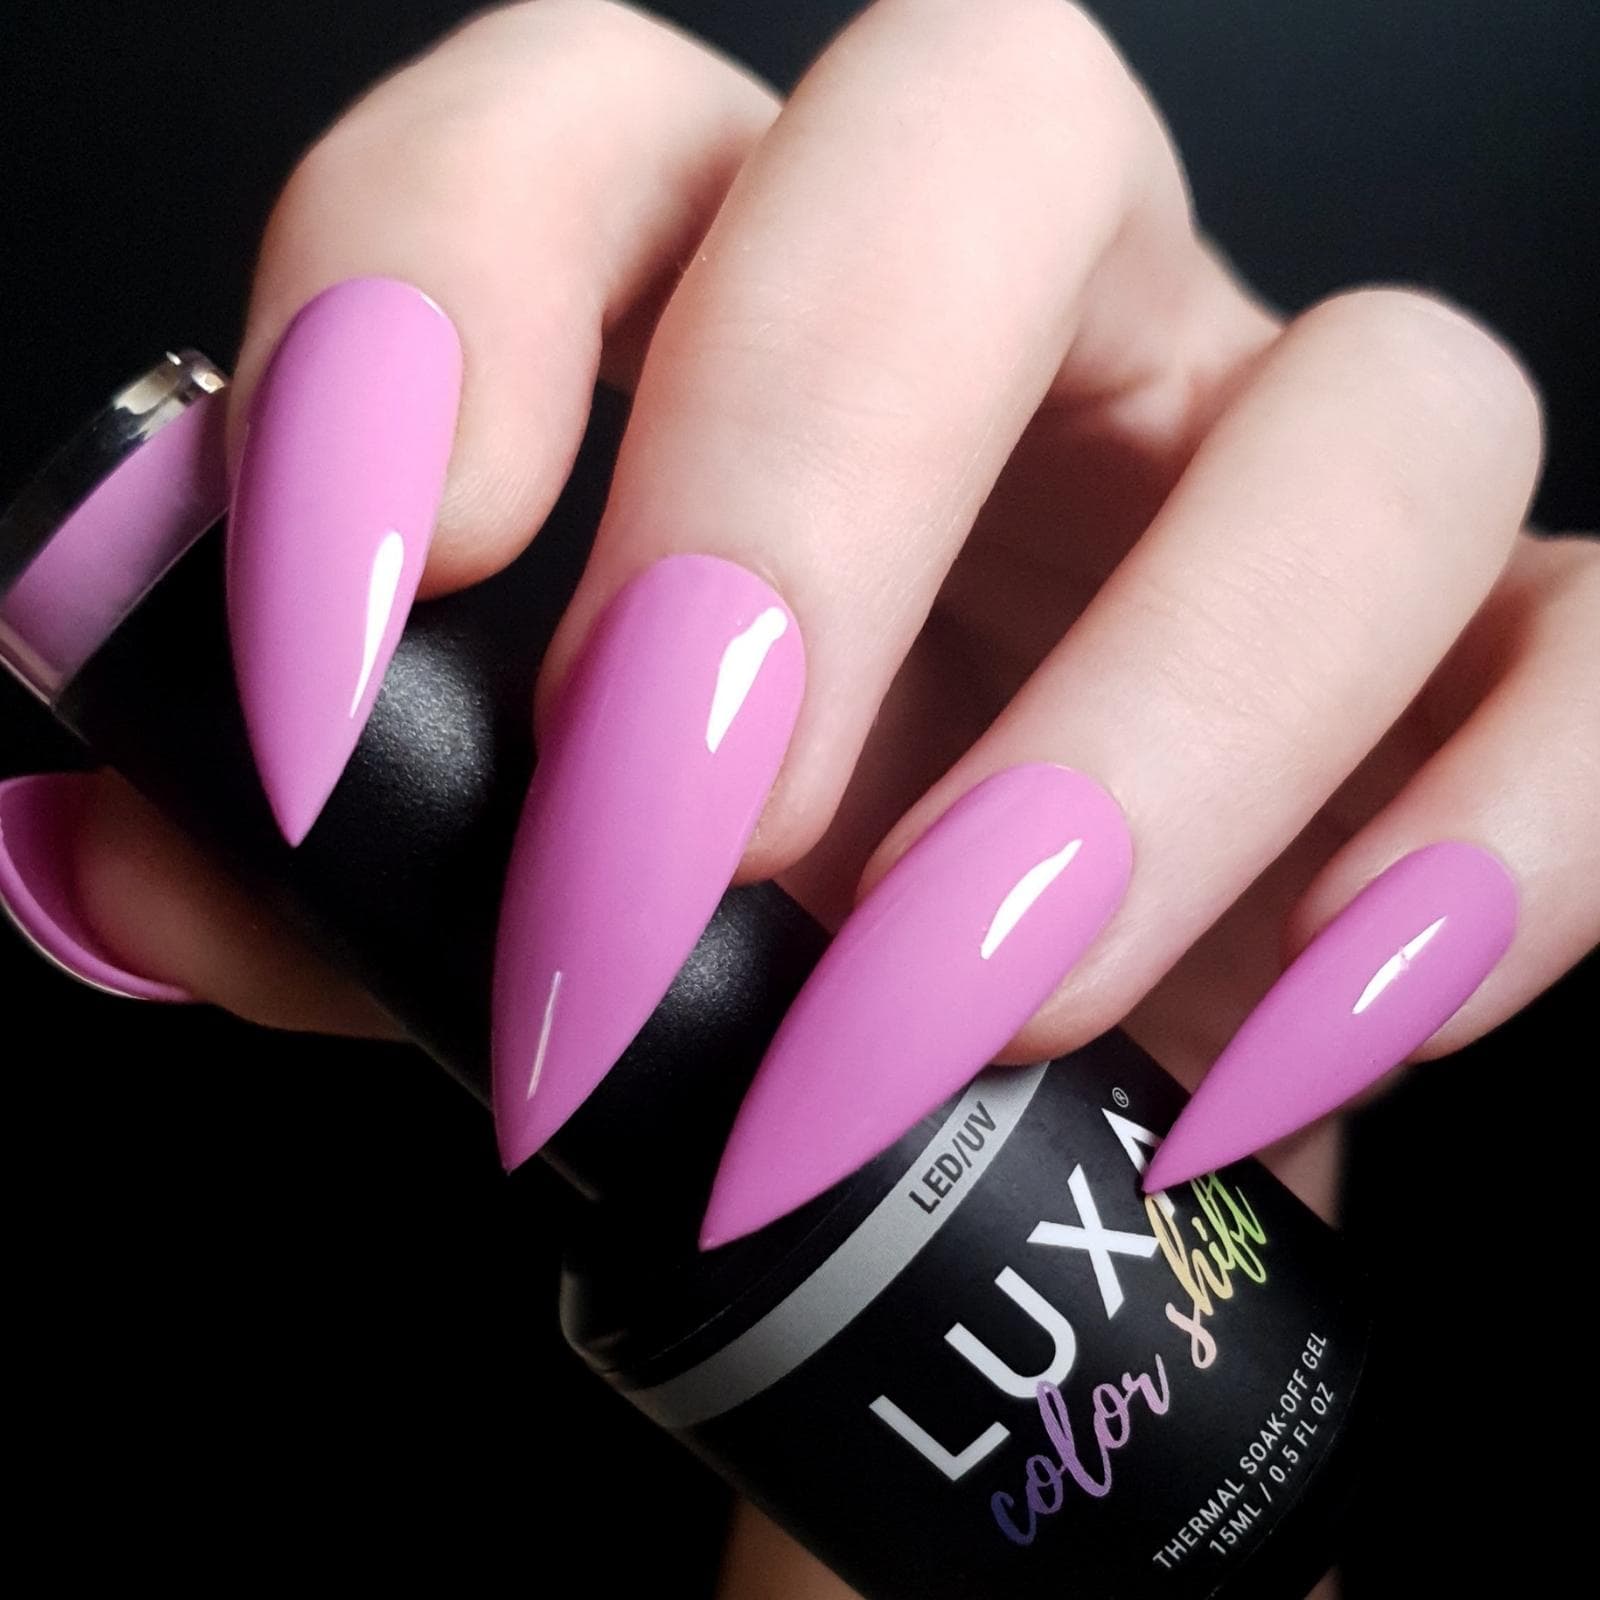 Luxapolish Floral Creme